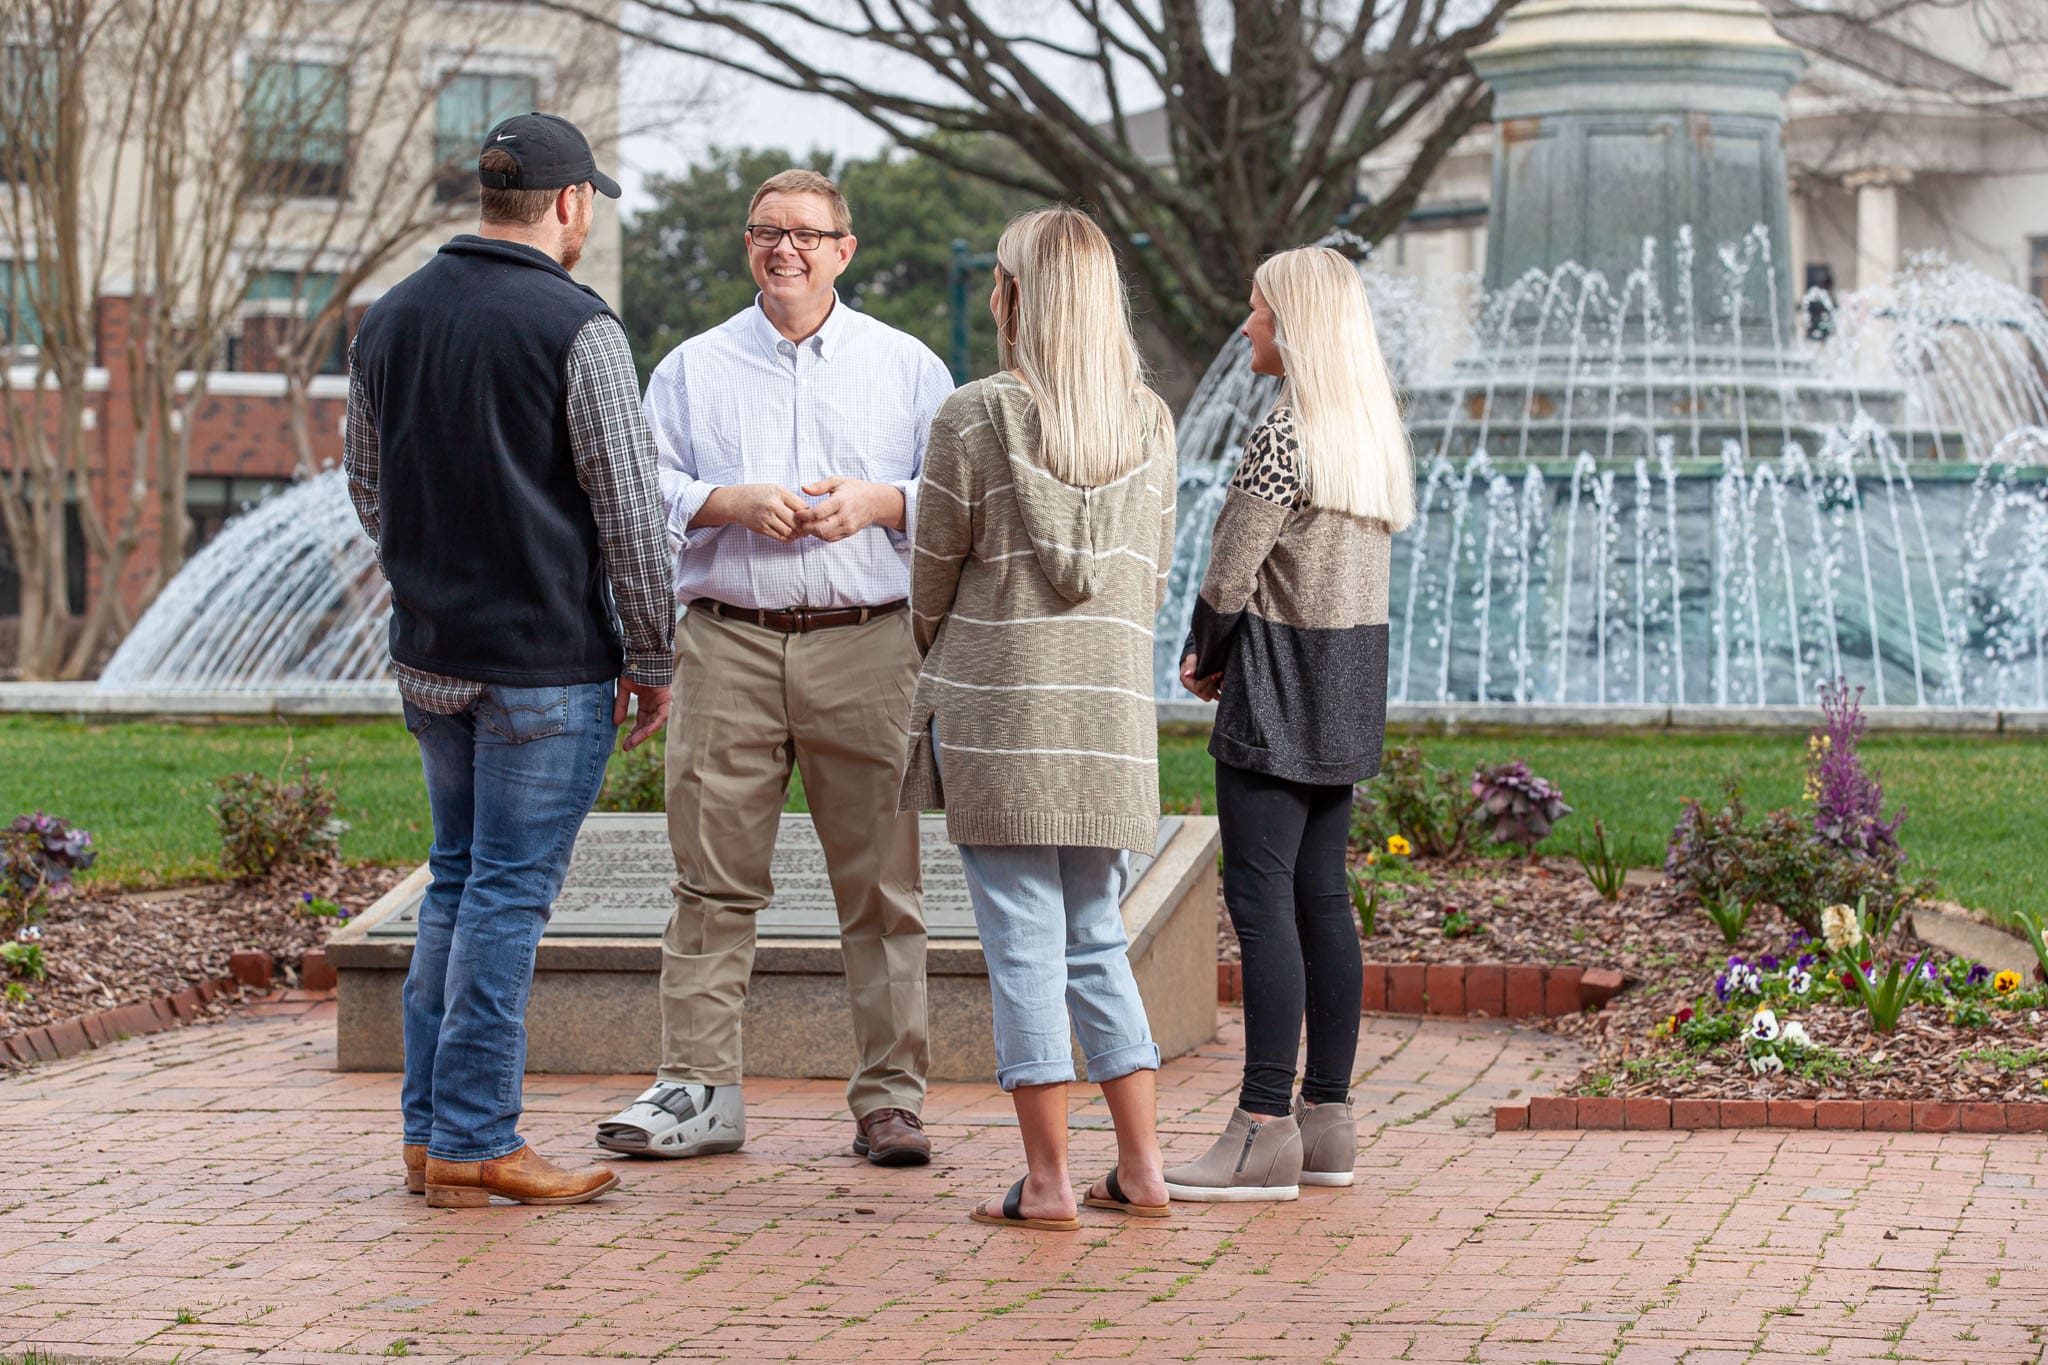 Georgia-State-Representative-and-helicopter-pilot-David-Jenkins-standing-in-front-of-a-water-fountain-in-a-city-park-talking-to-a-young-man-and-two-young-women.